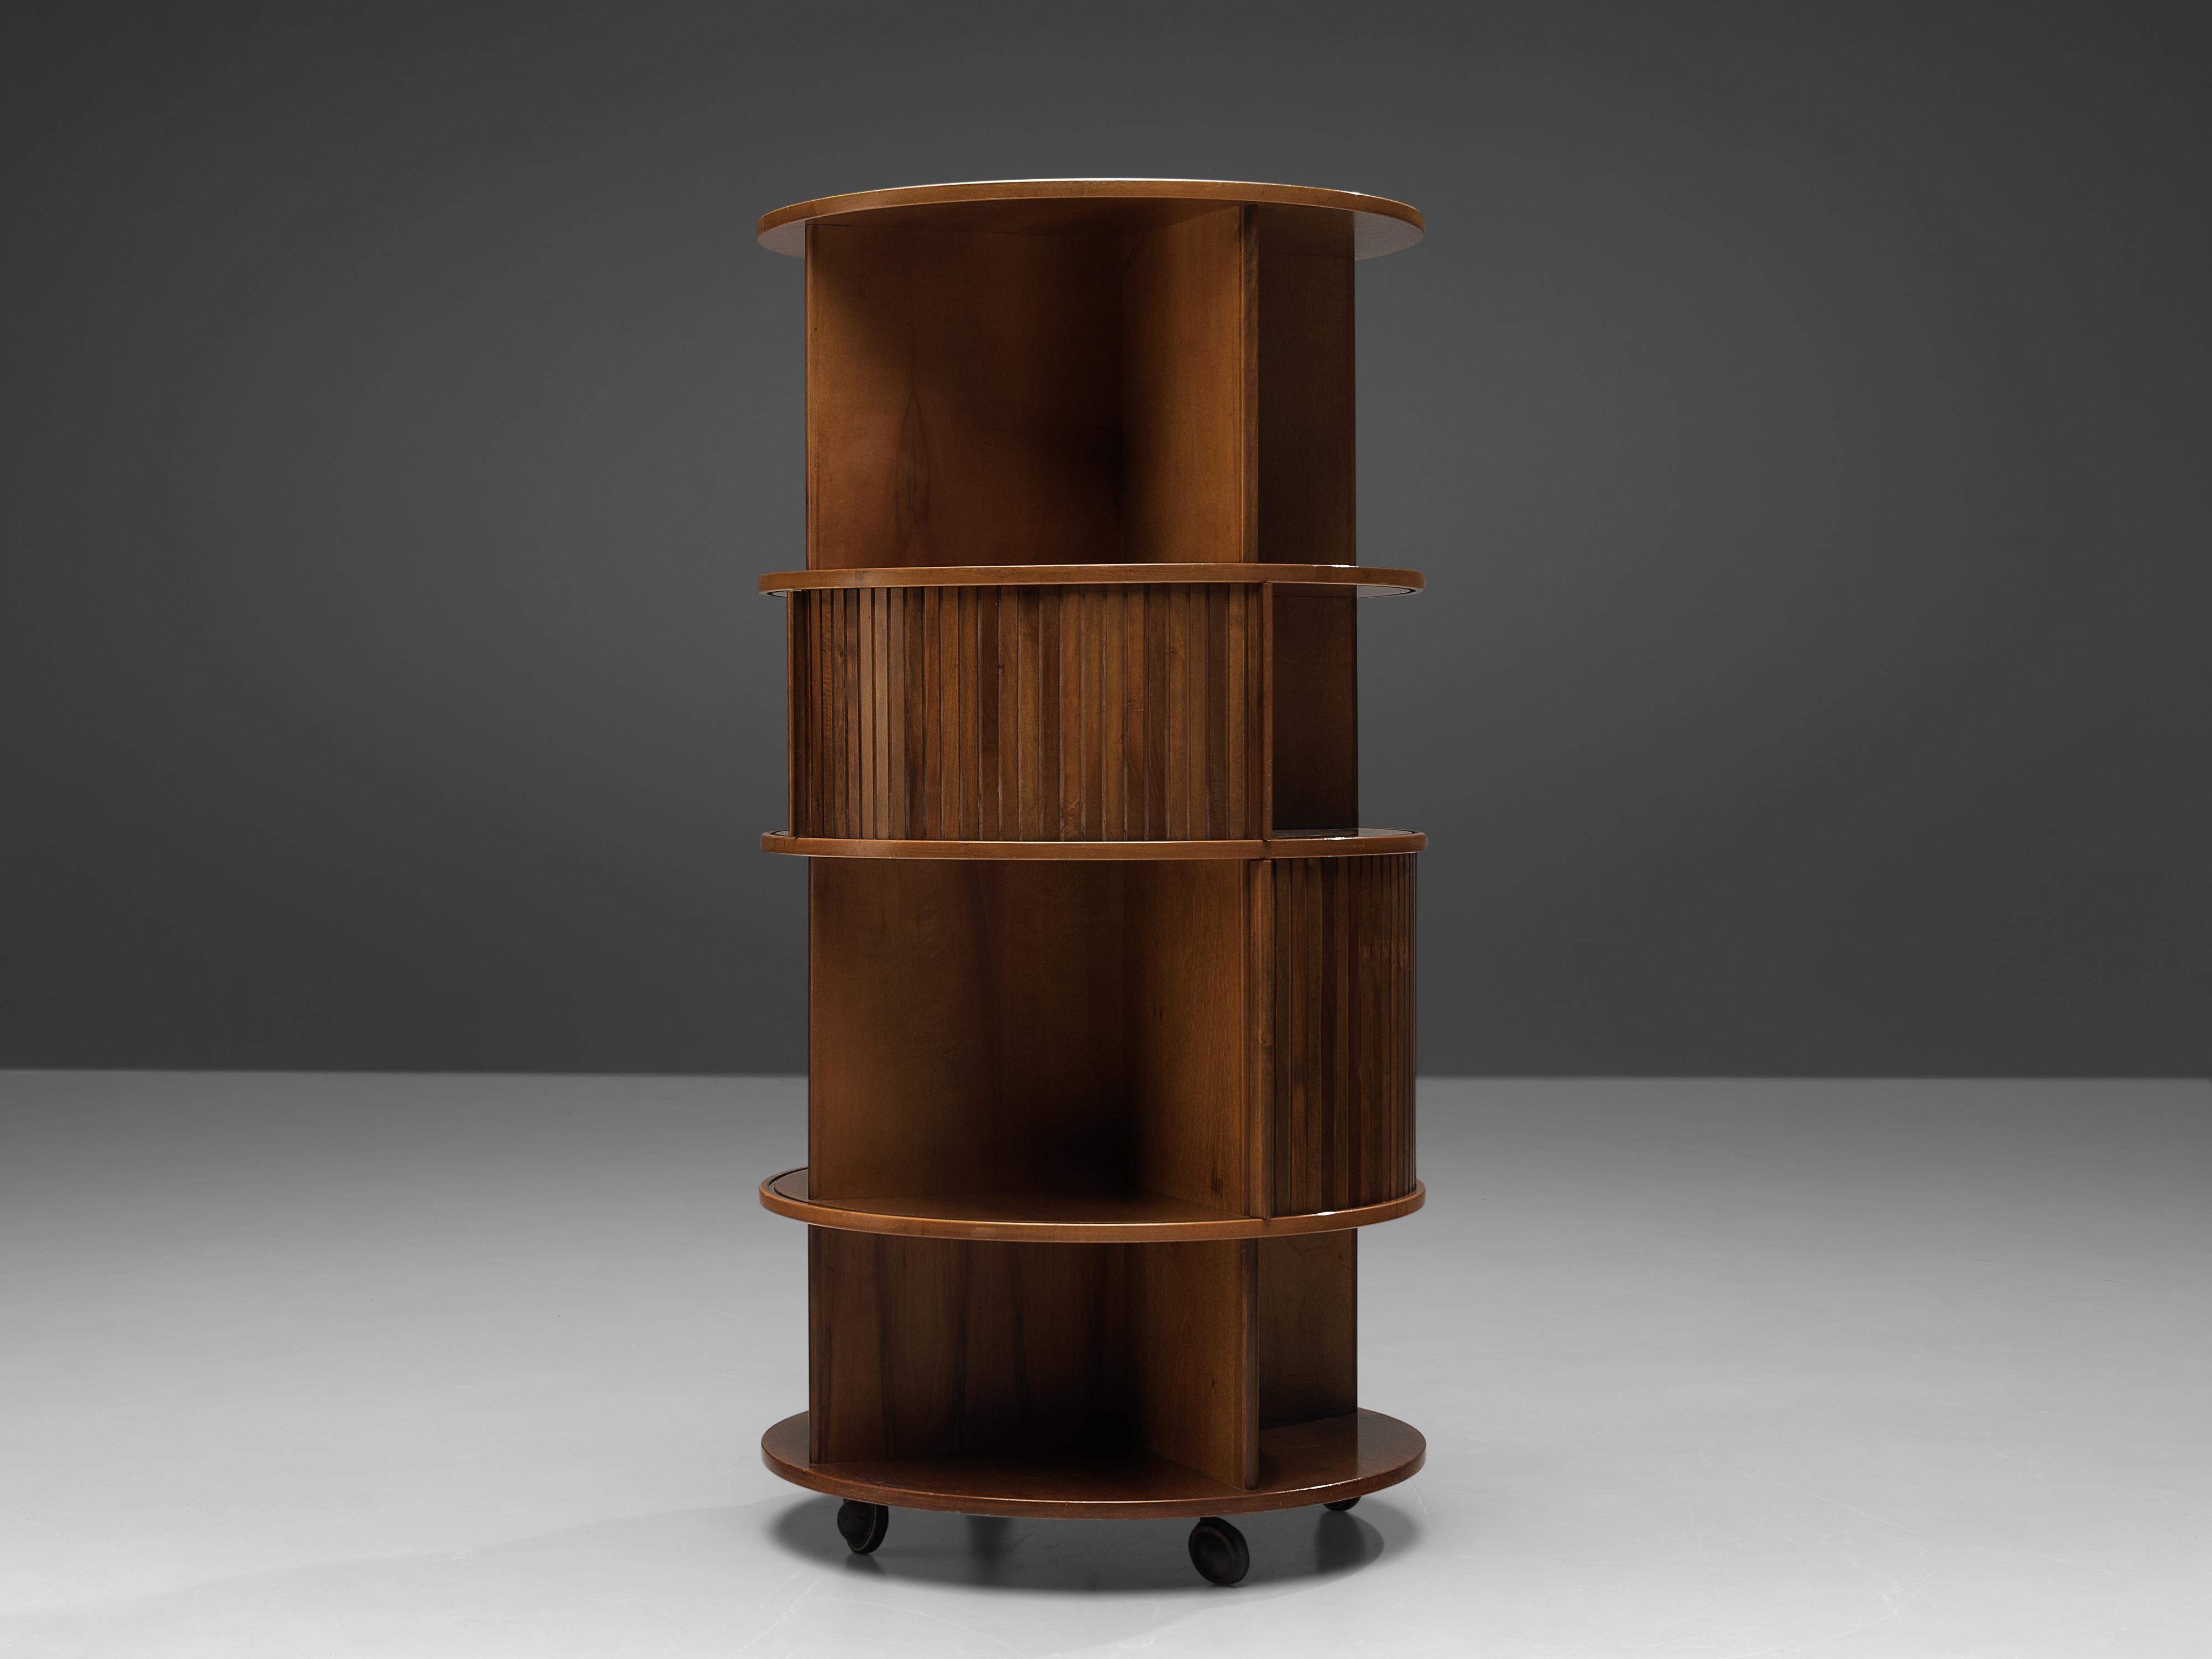 Movable circular cabinet, walnut, metal, Italy, 1950s

Free-standing cabinet or bookcase in circular shape. It rests on wheels, so that it can be moved around flexible in the room. Four levels of open shelves allow you to showcase your chosen